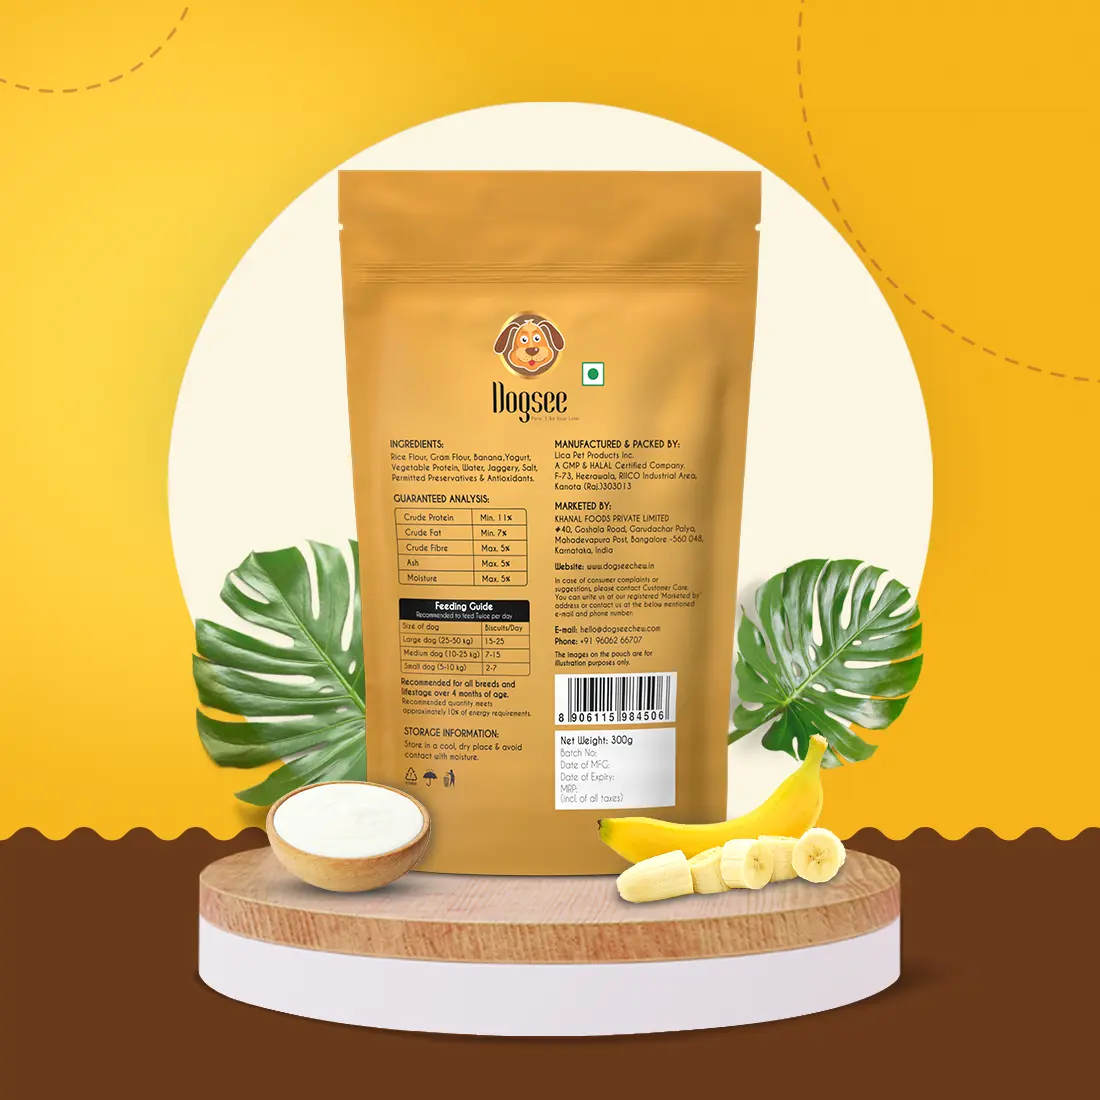 Product Specification - Banana Yogurt Cookies for Dogs